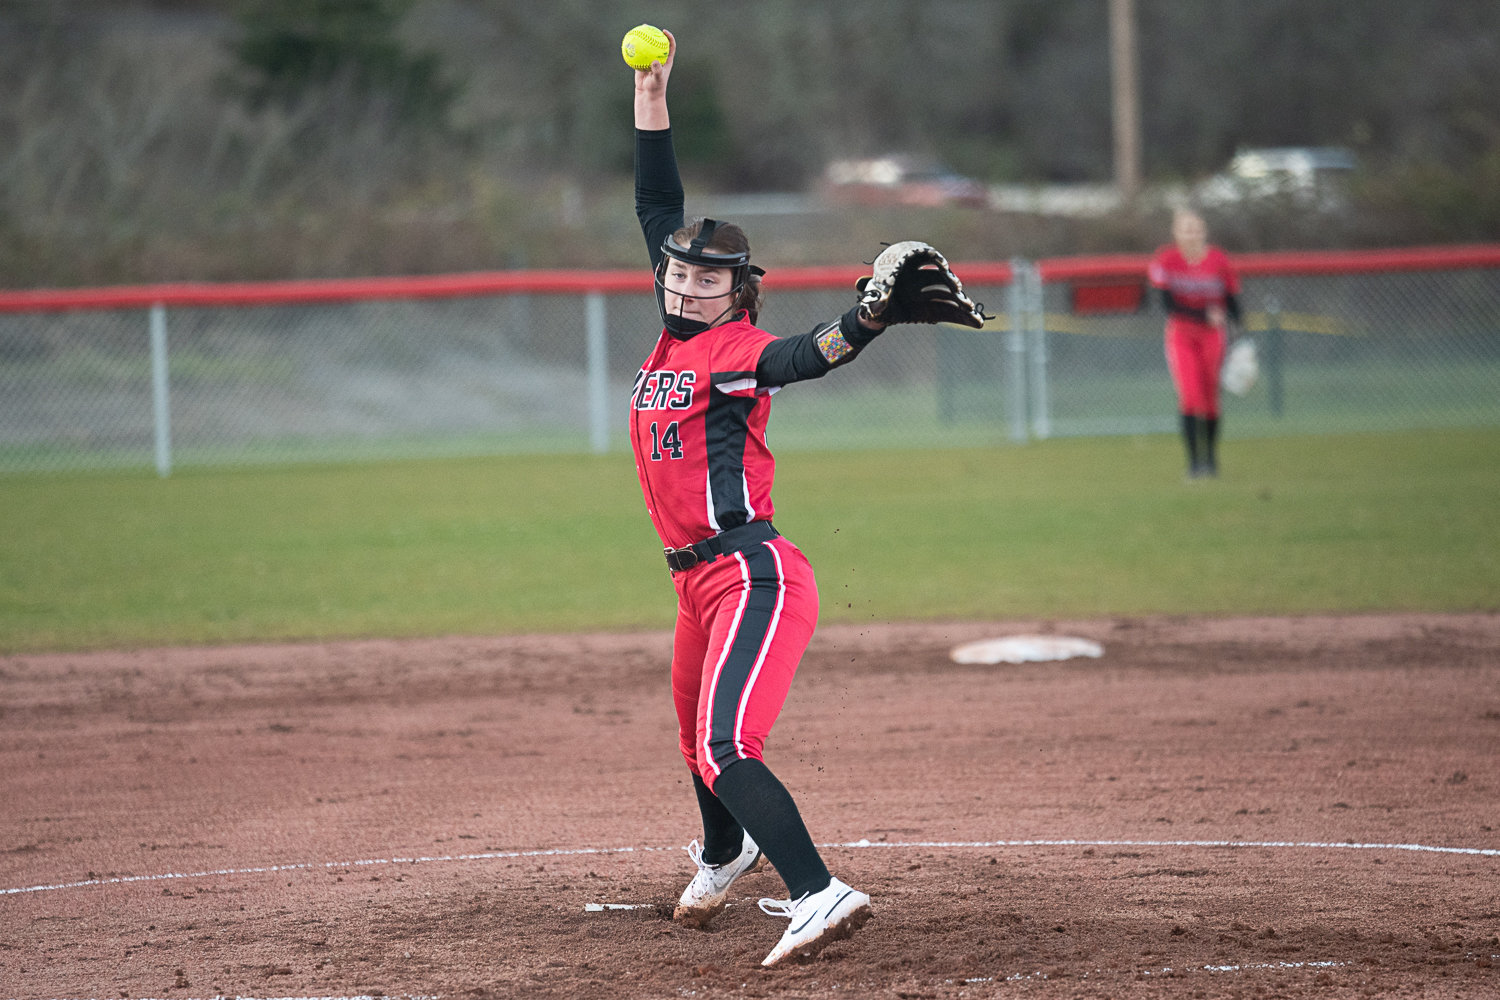 Chloe Grayless throws a pitch during Tenino's 27-8 loss to Napavine on March 14.